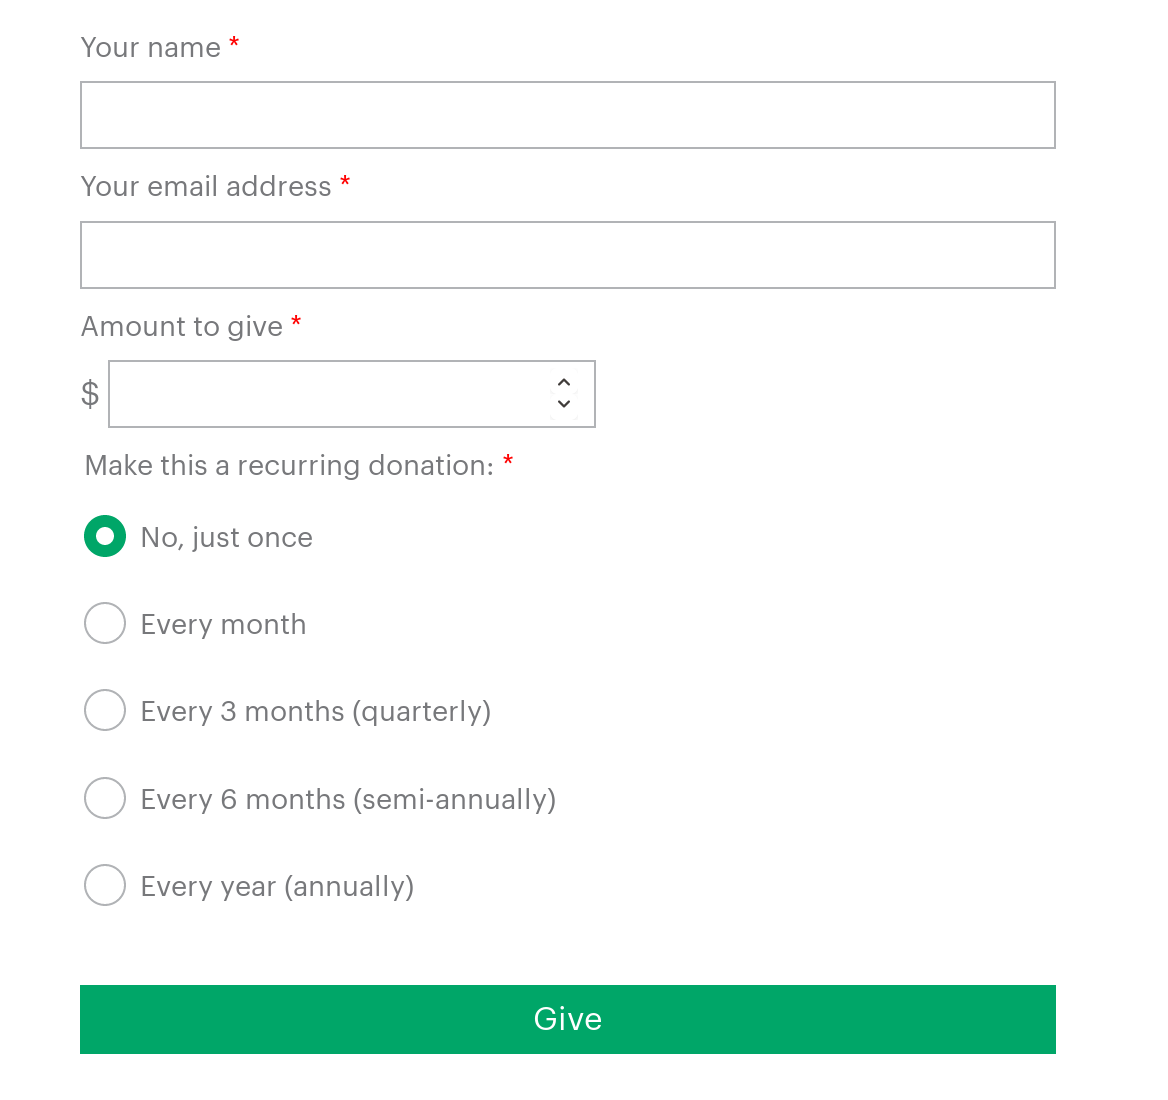 Screenshot of a give donation form, with name, e-mail address, amount, recurring options as radio buttons, and a big Give button at the bottom.